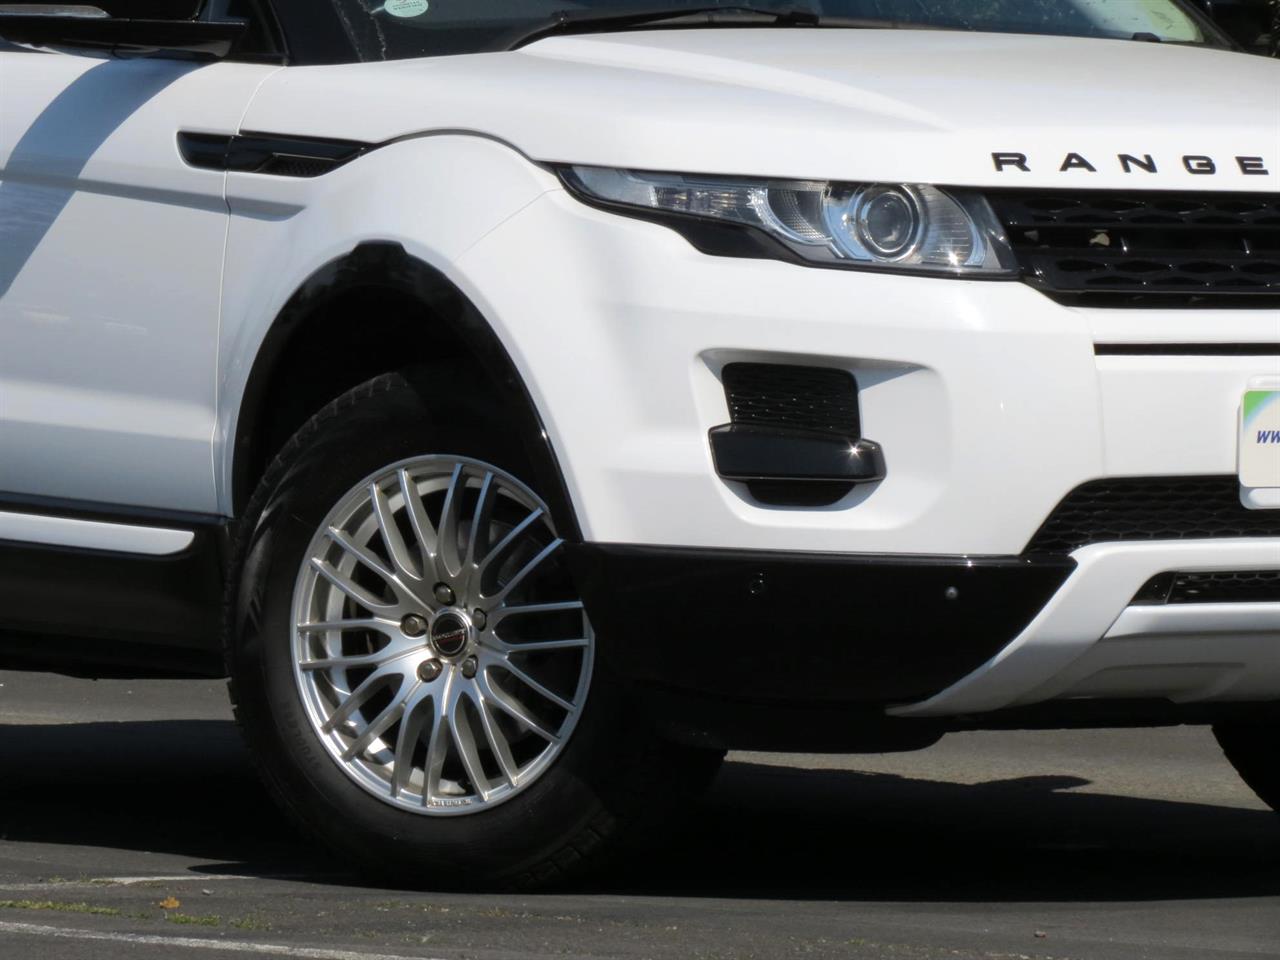 2013 Land Rover Range Rover Evoque only $108 weekly